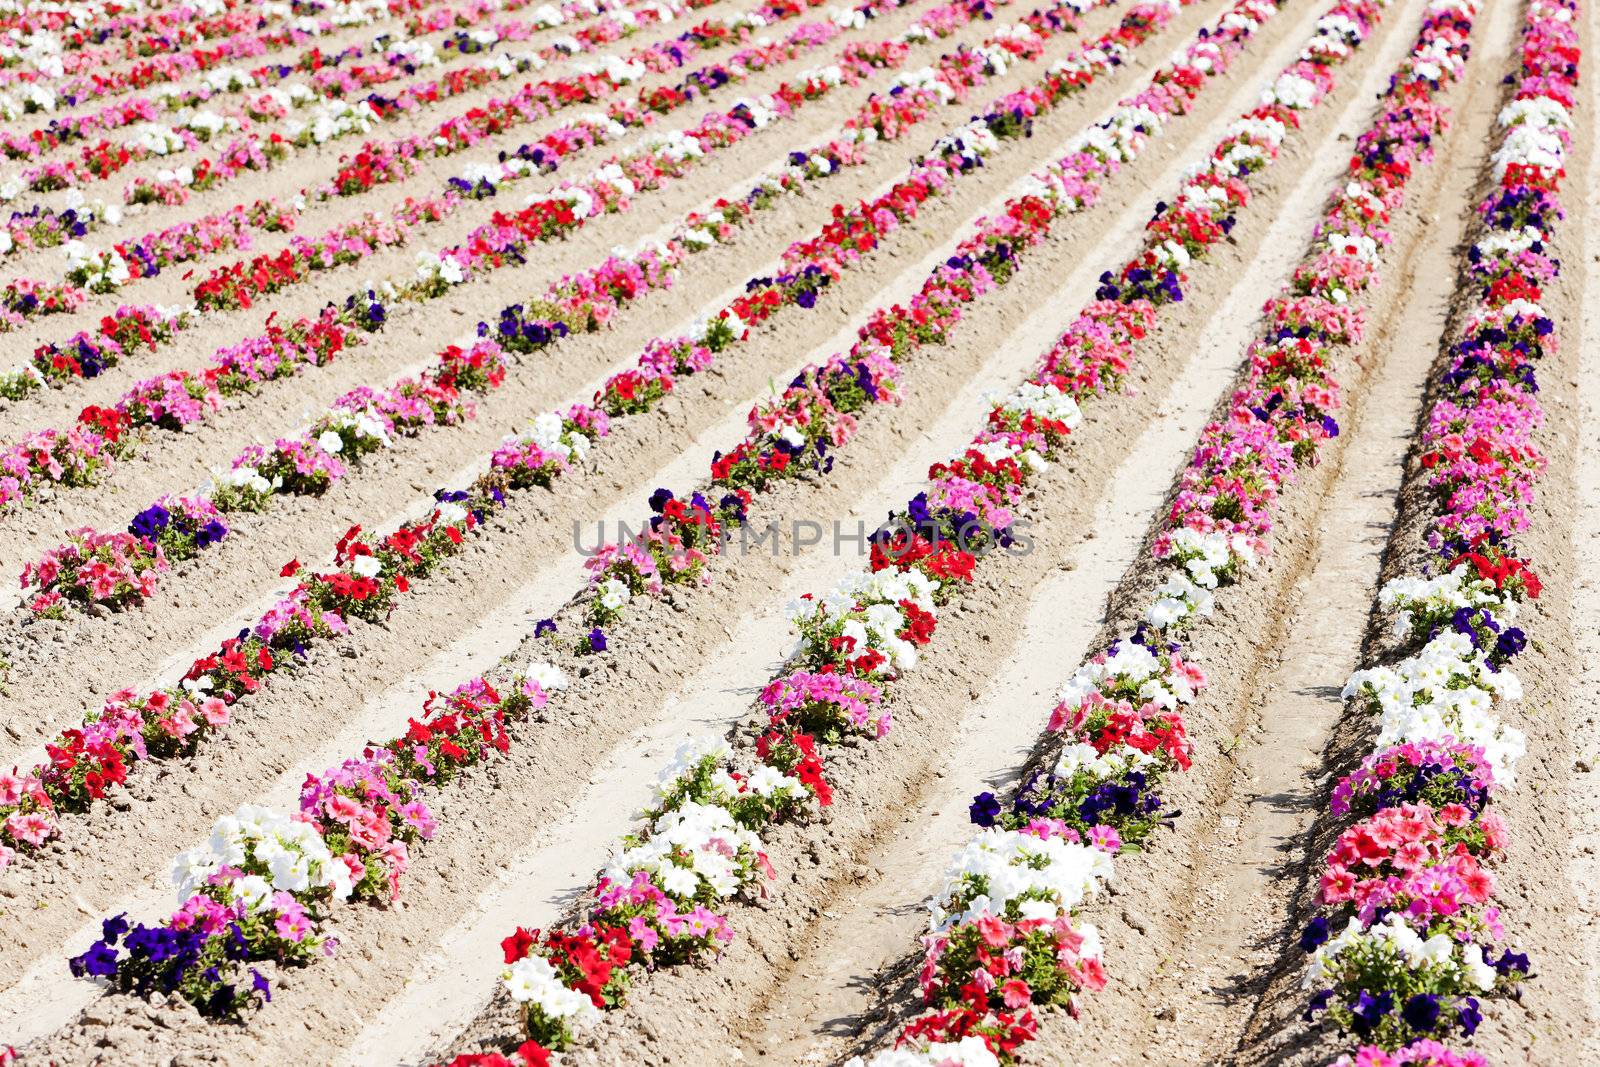 flower field, Provence, France by phbcz